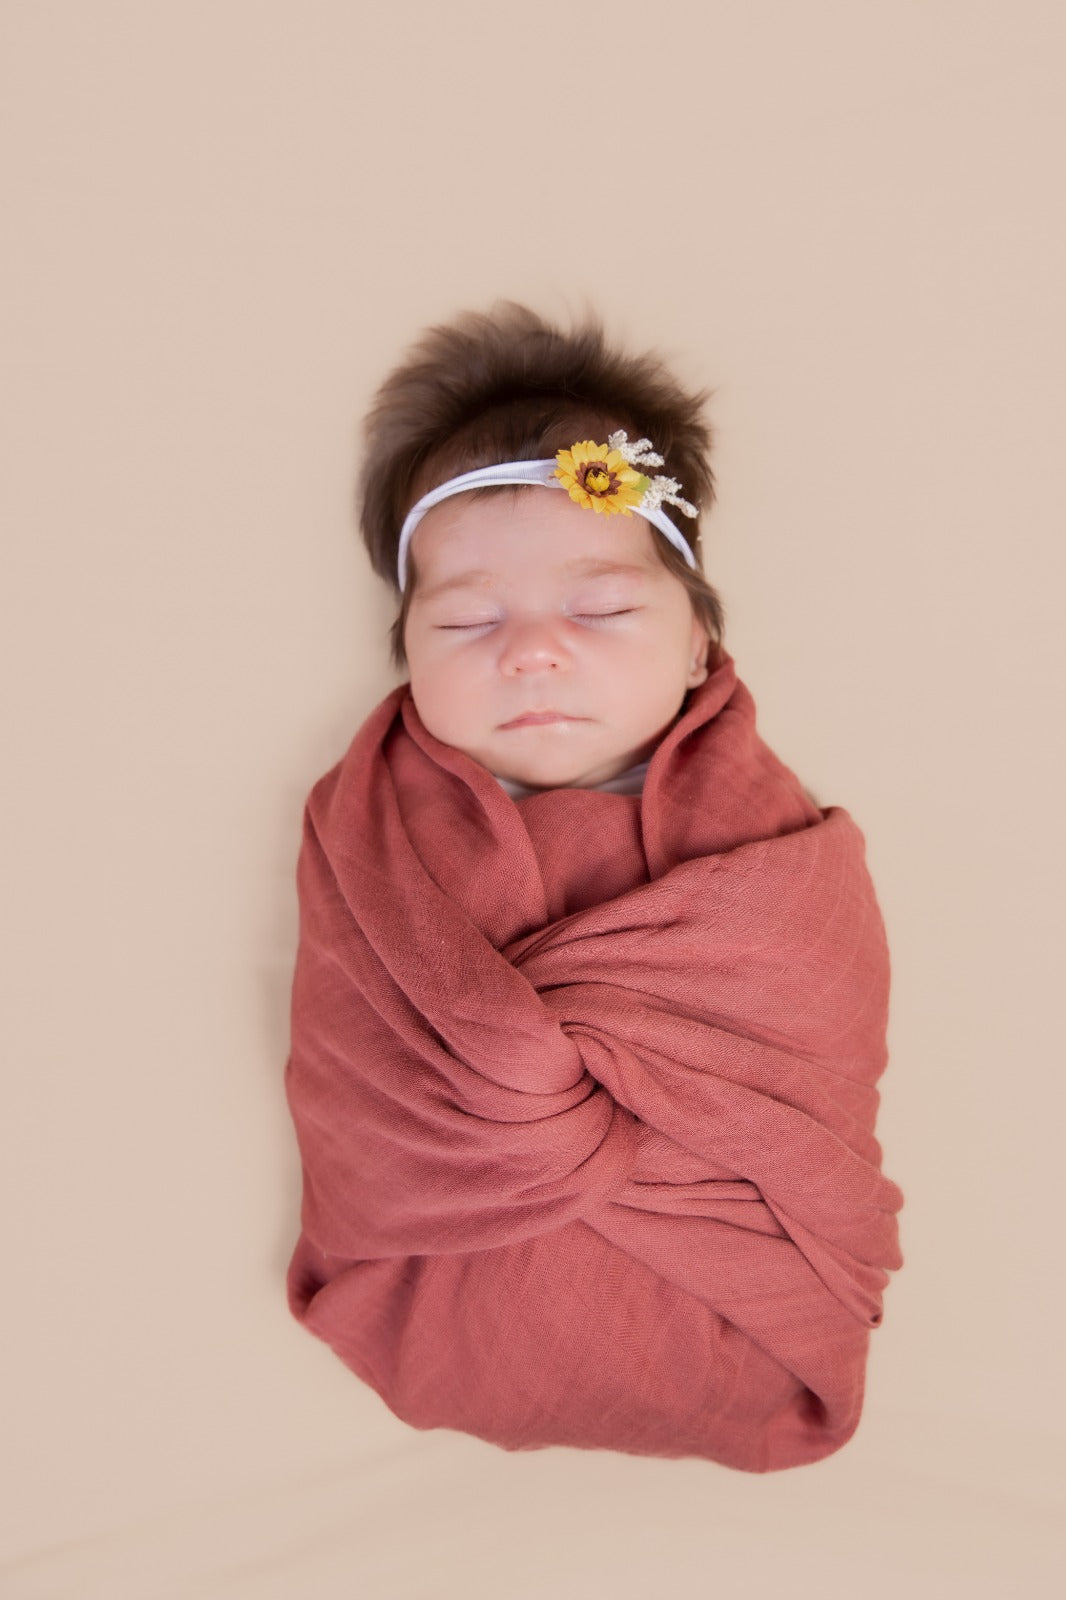 how to swaddle a baby with a blanket?